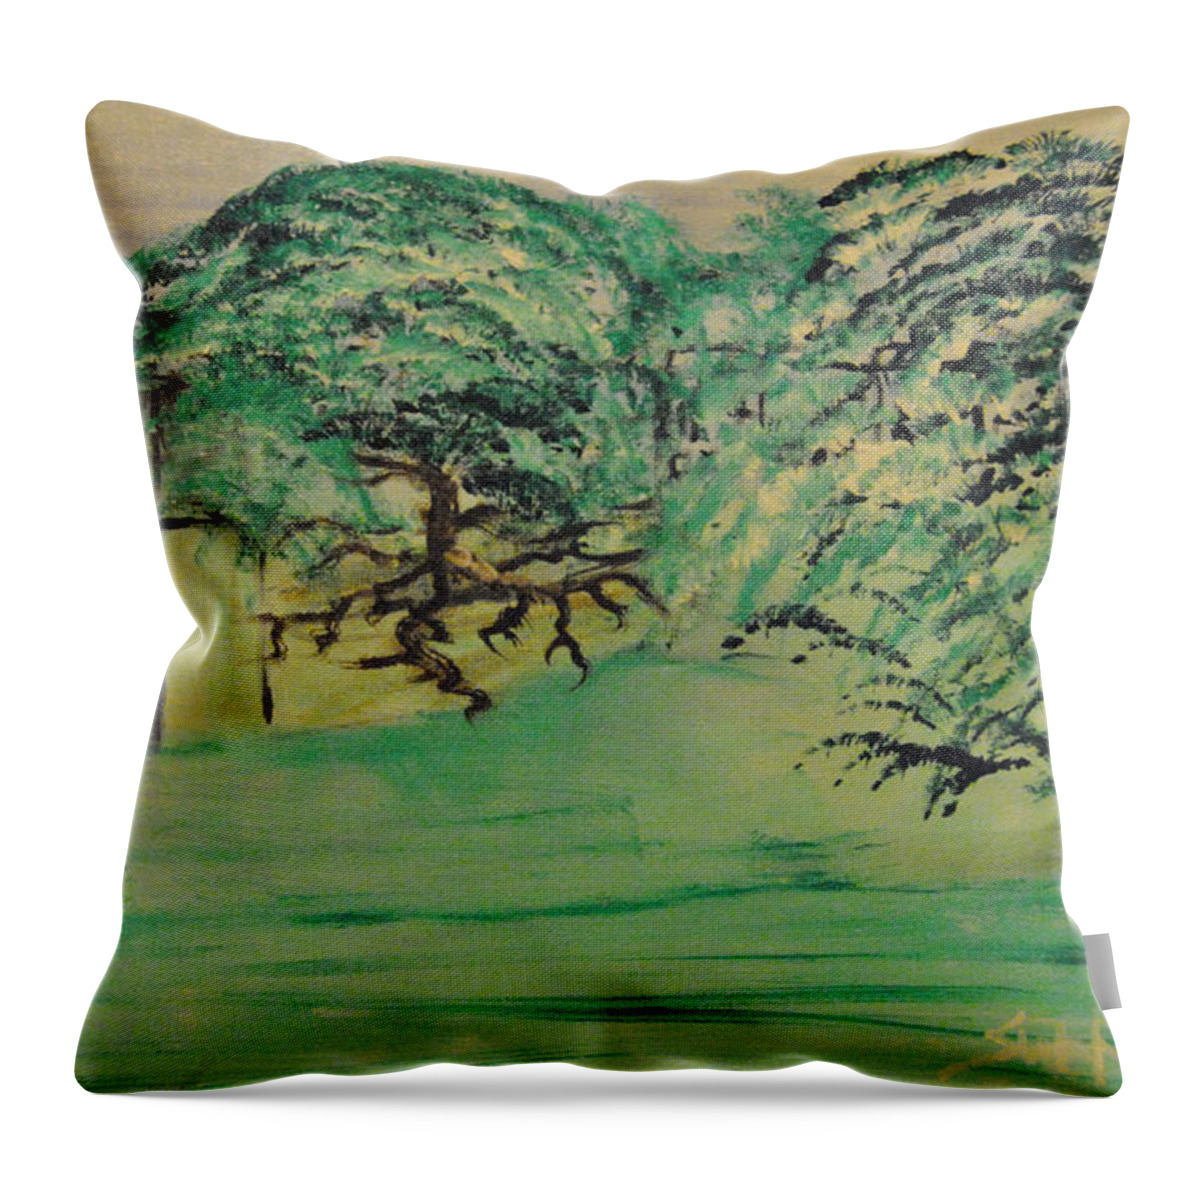 Green Trees Throw Pillow featuring the painting Floating Wonders by Suzanne Surber